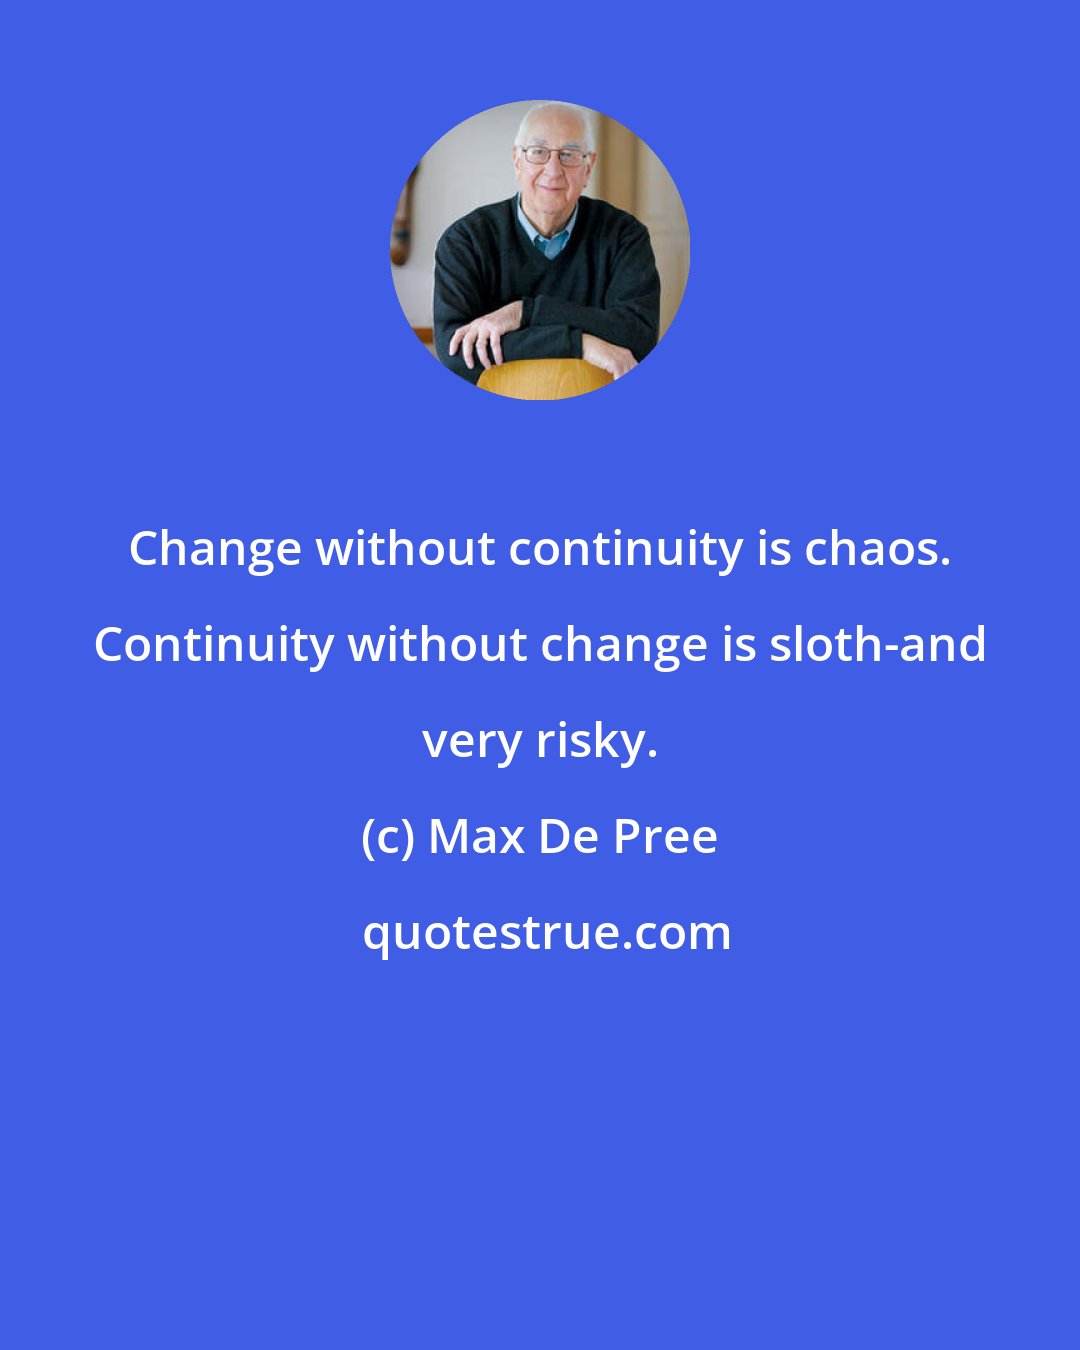 Max De Pree: Change without continuity is chaos. Continuity without change is sloth-and very risky.